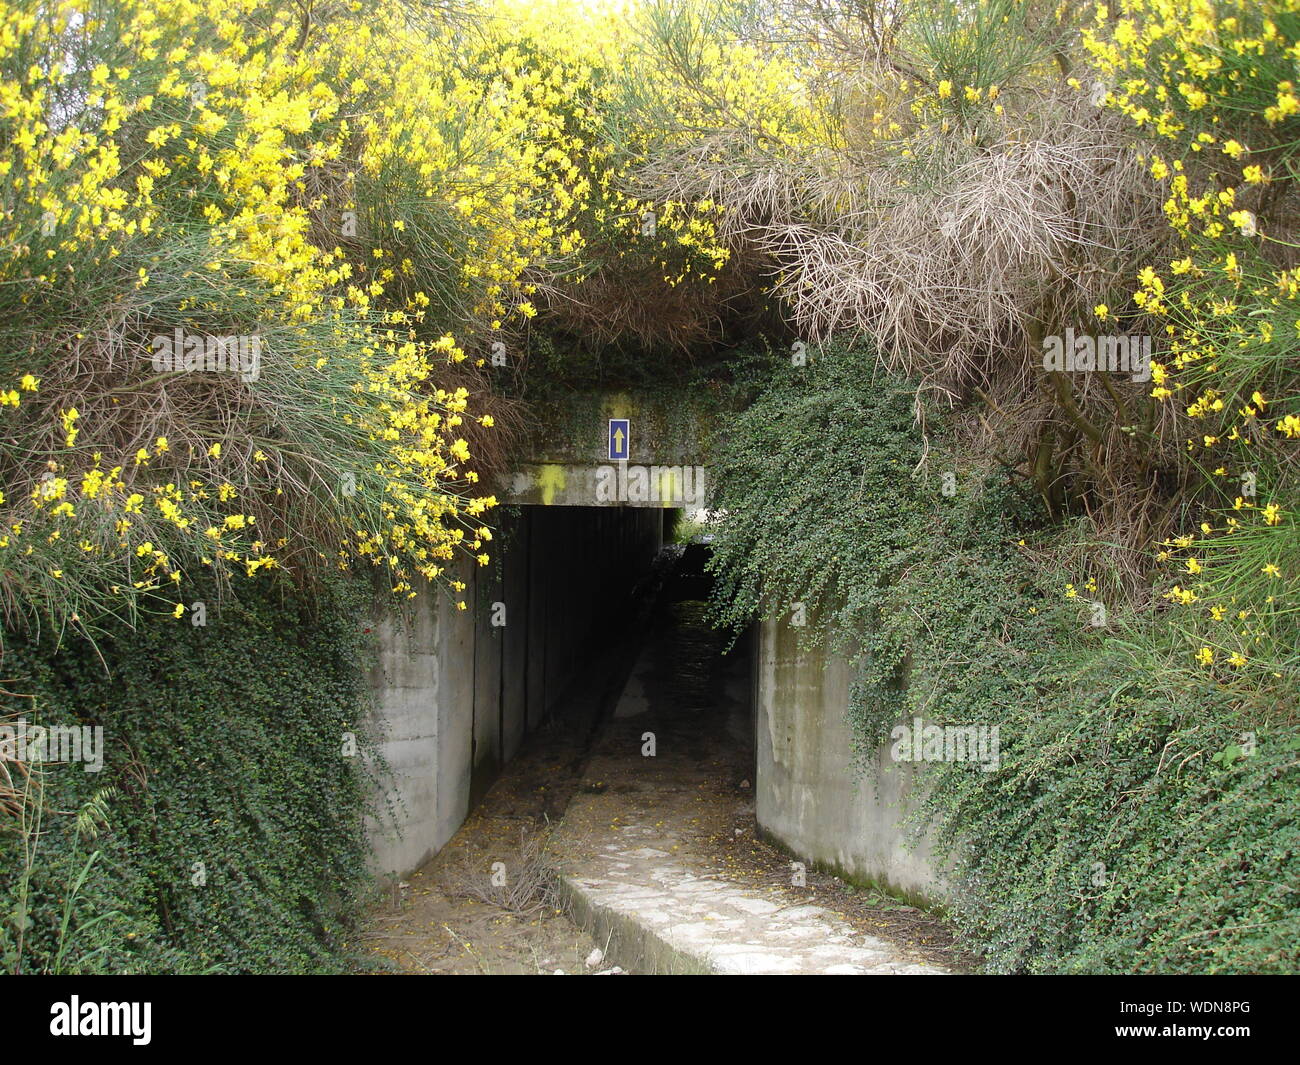 Narrow Tunnel Surrounded With Plants Stock Photo